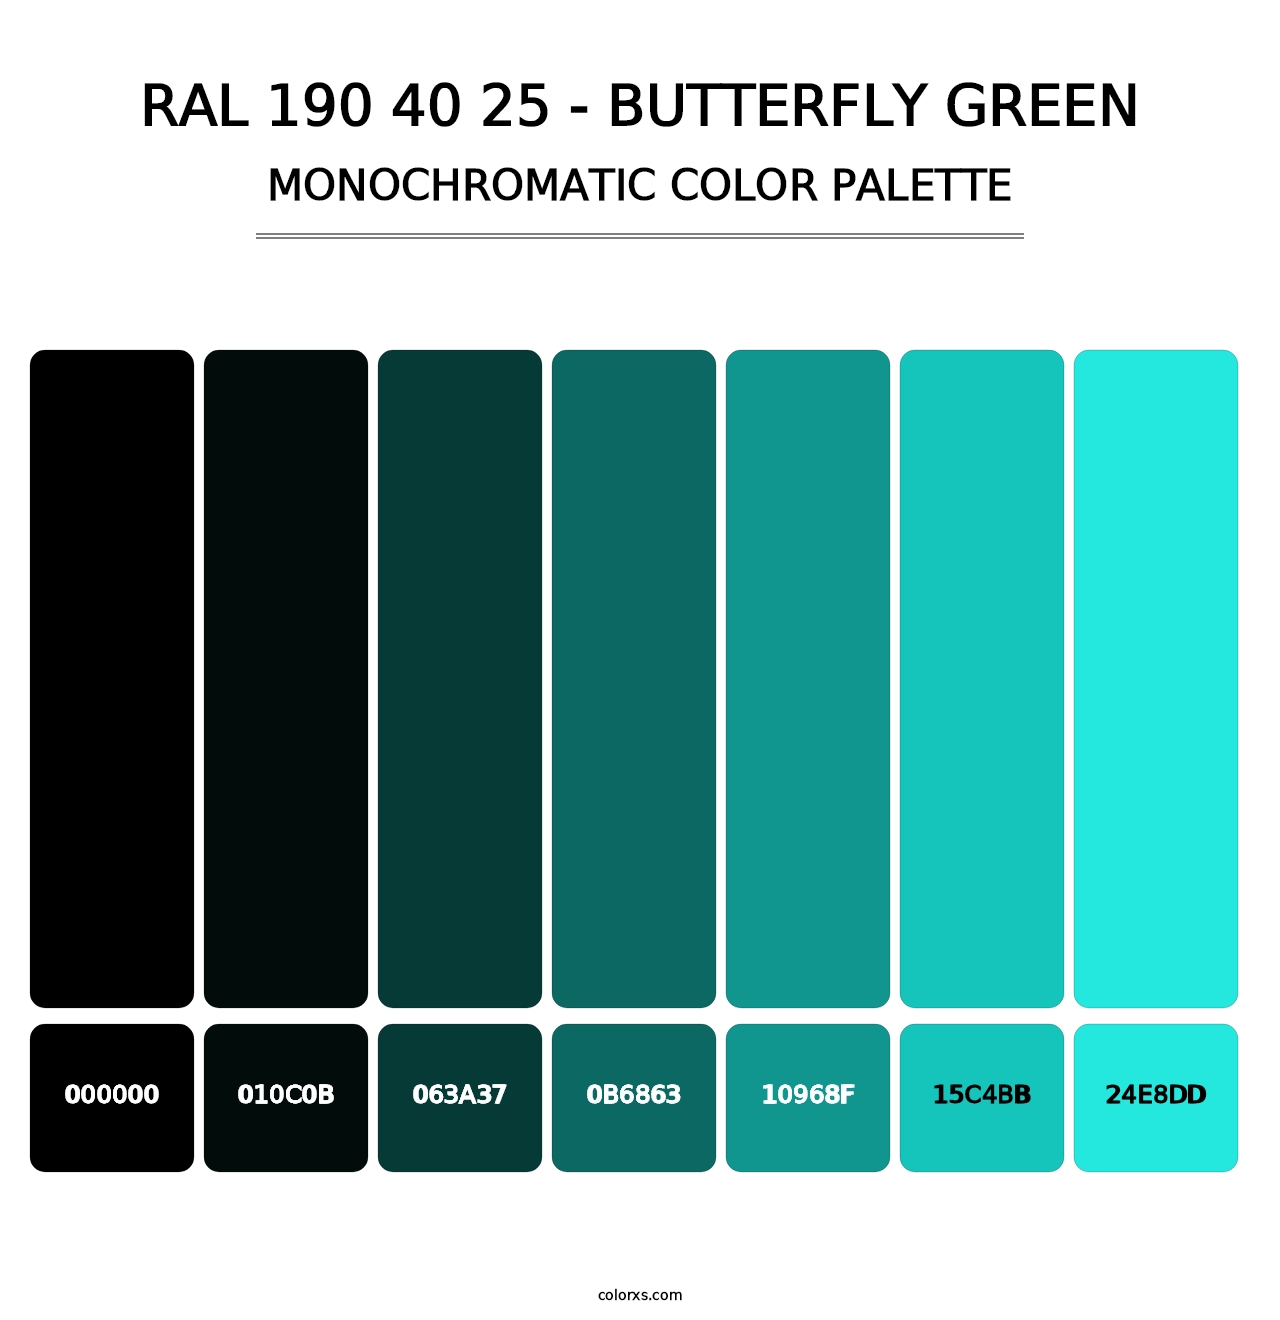 RAL 190 40 25 - Butterfly Green - Monochromatic Color Palette